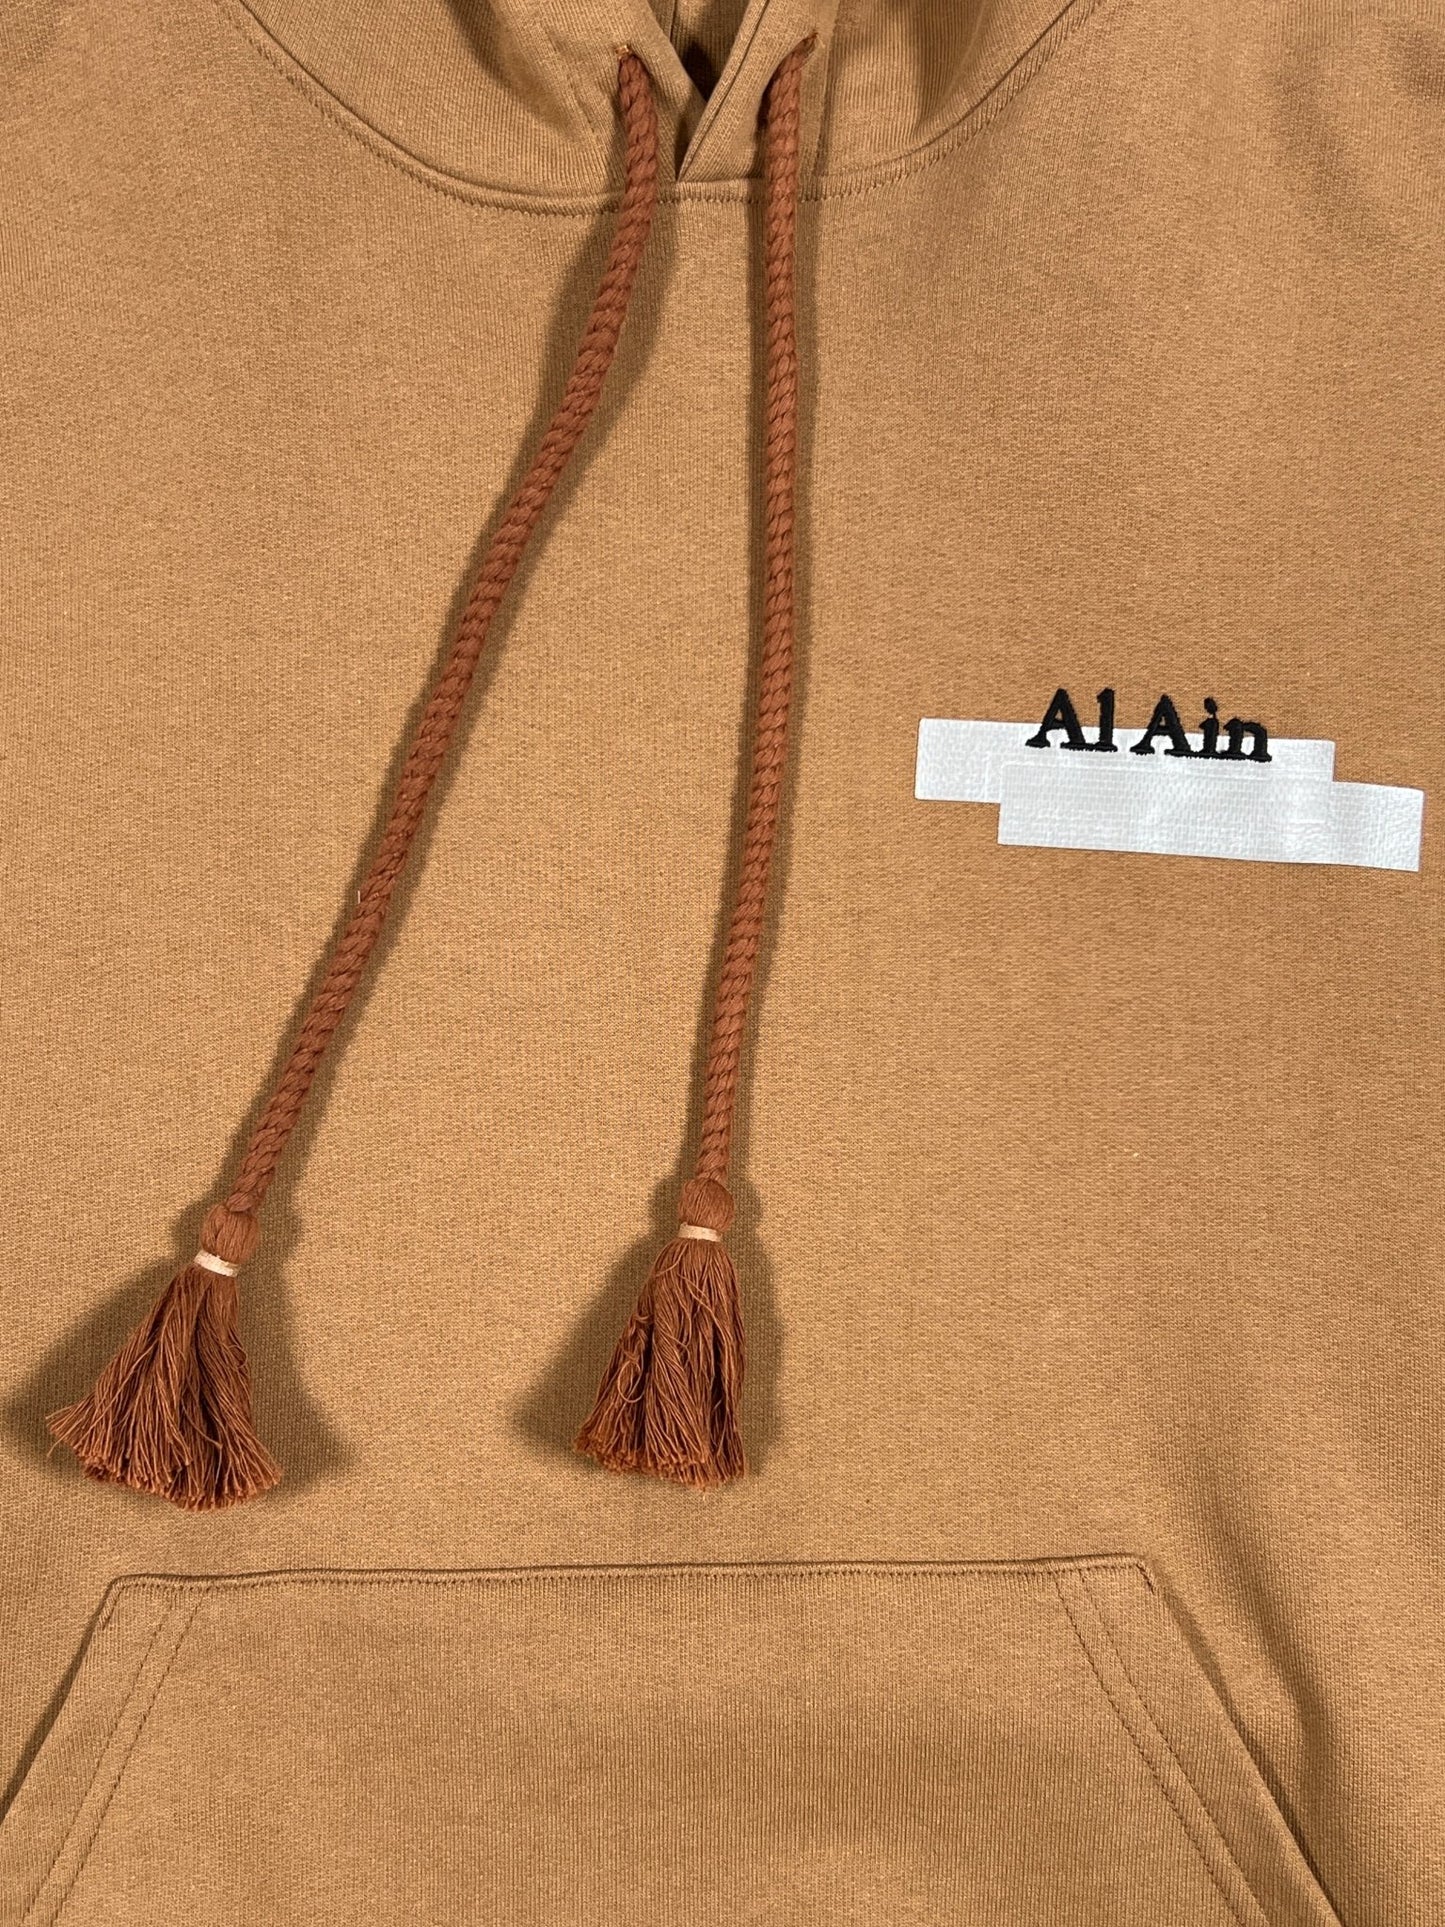 Close-up of a brown AL AIN AHOX S102 PALMIER CHAMEAU hoodie with drawstrings and a label reading "al ain".